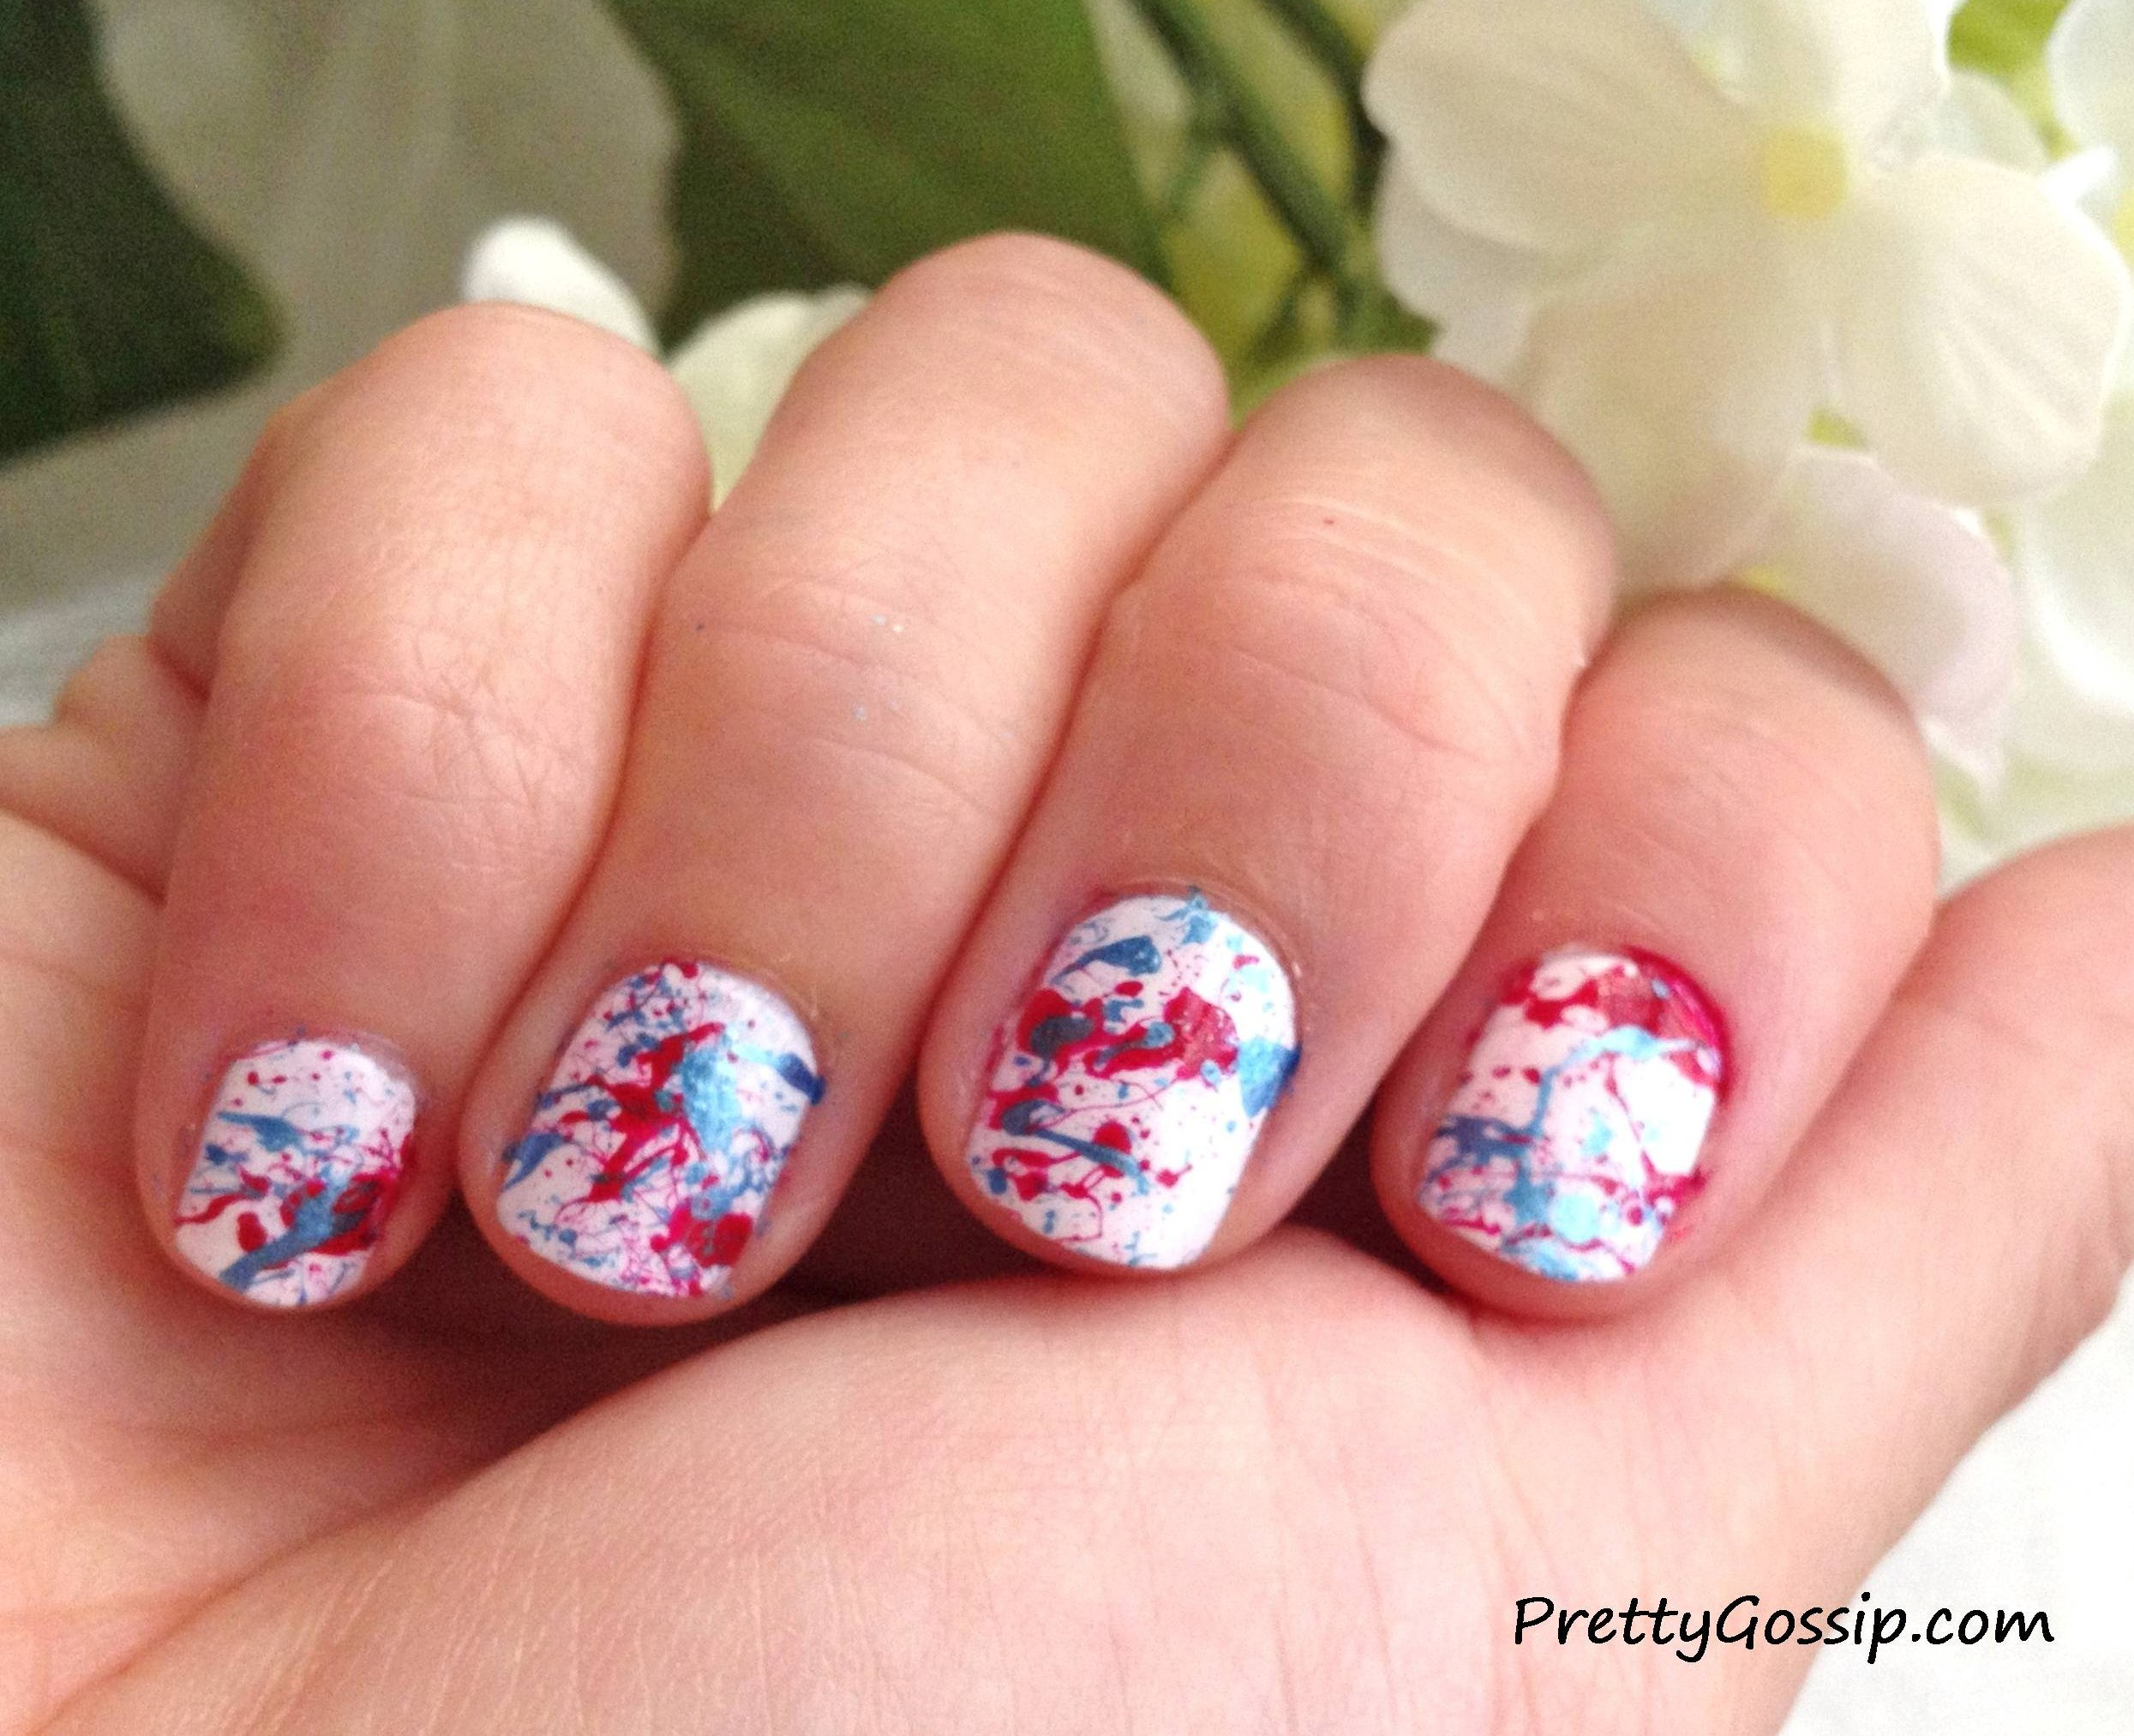 Nails That Are Pretty
 How To Splatter Paint Nails Pretty Gossip